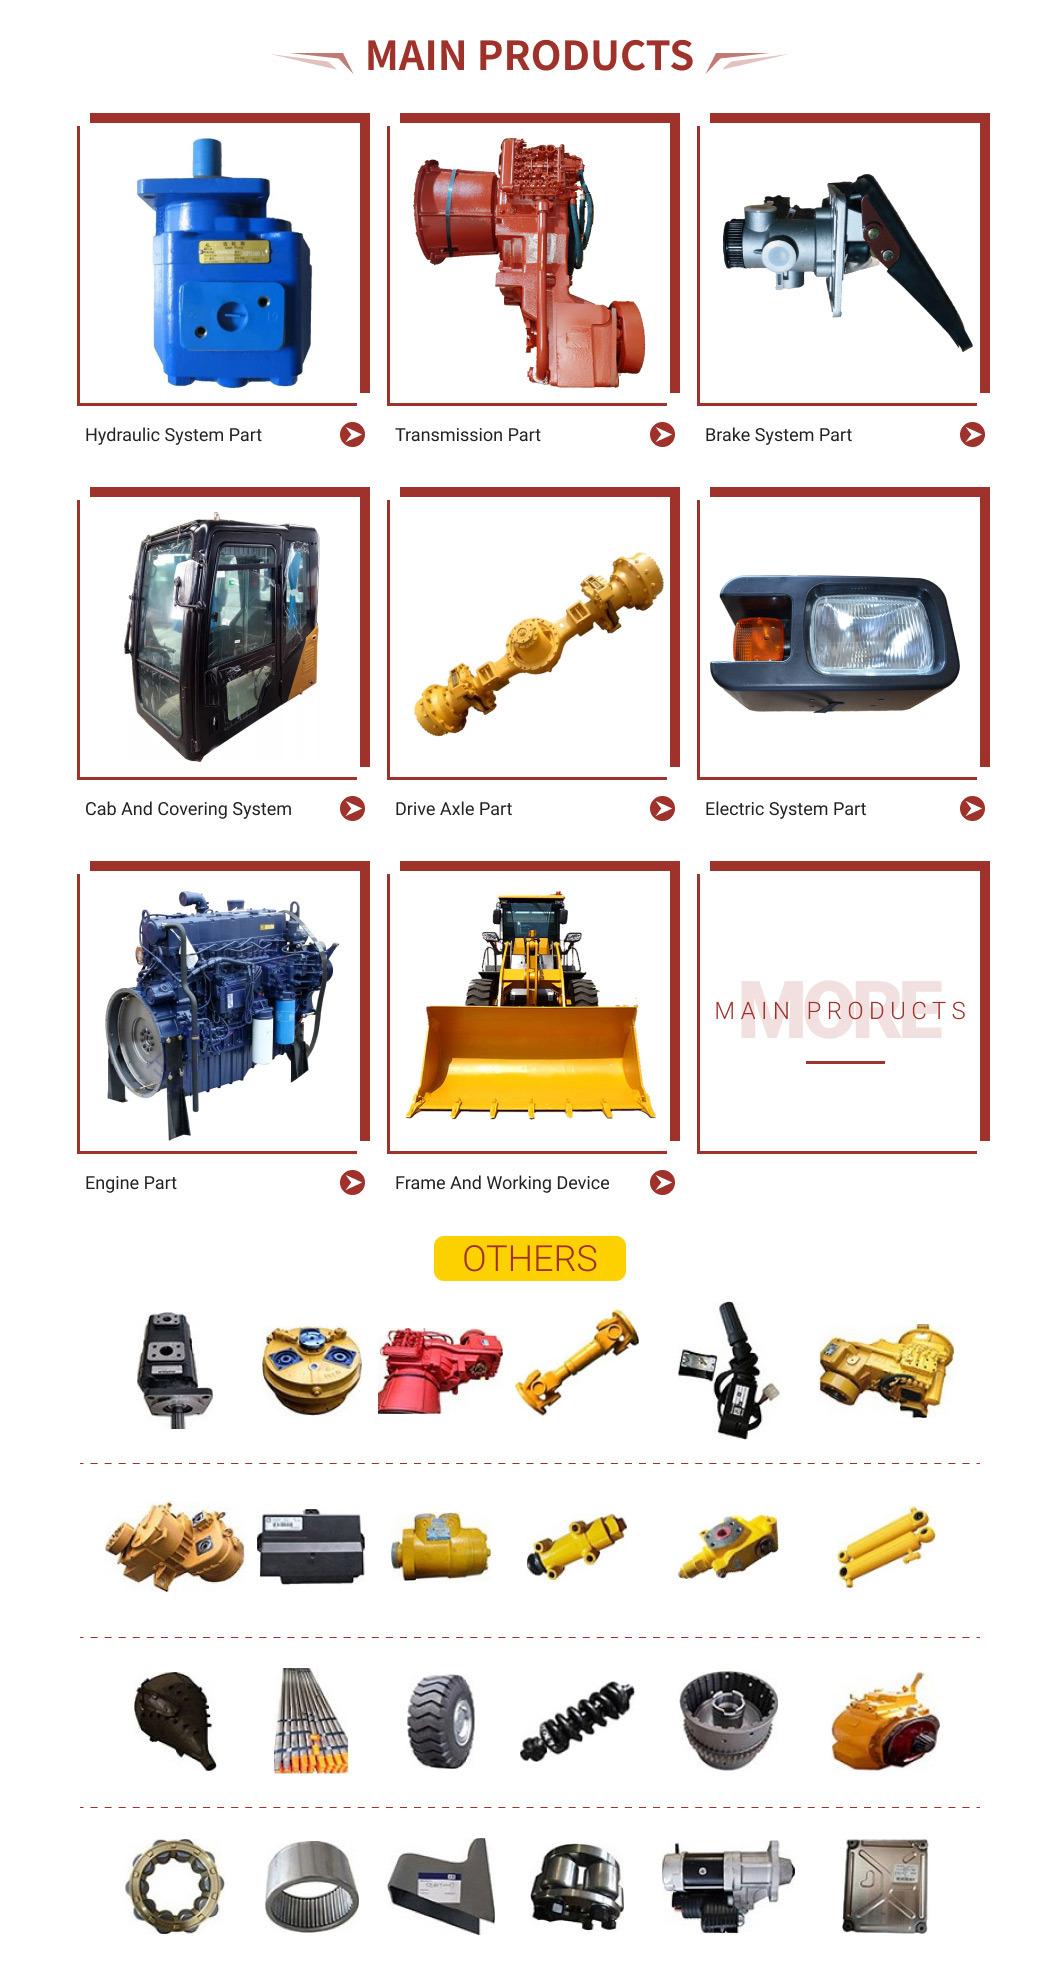 New OEM Hydraulic Oil Cylinder Pump for Excavator Chinese Loader Manufacture